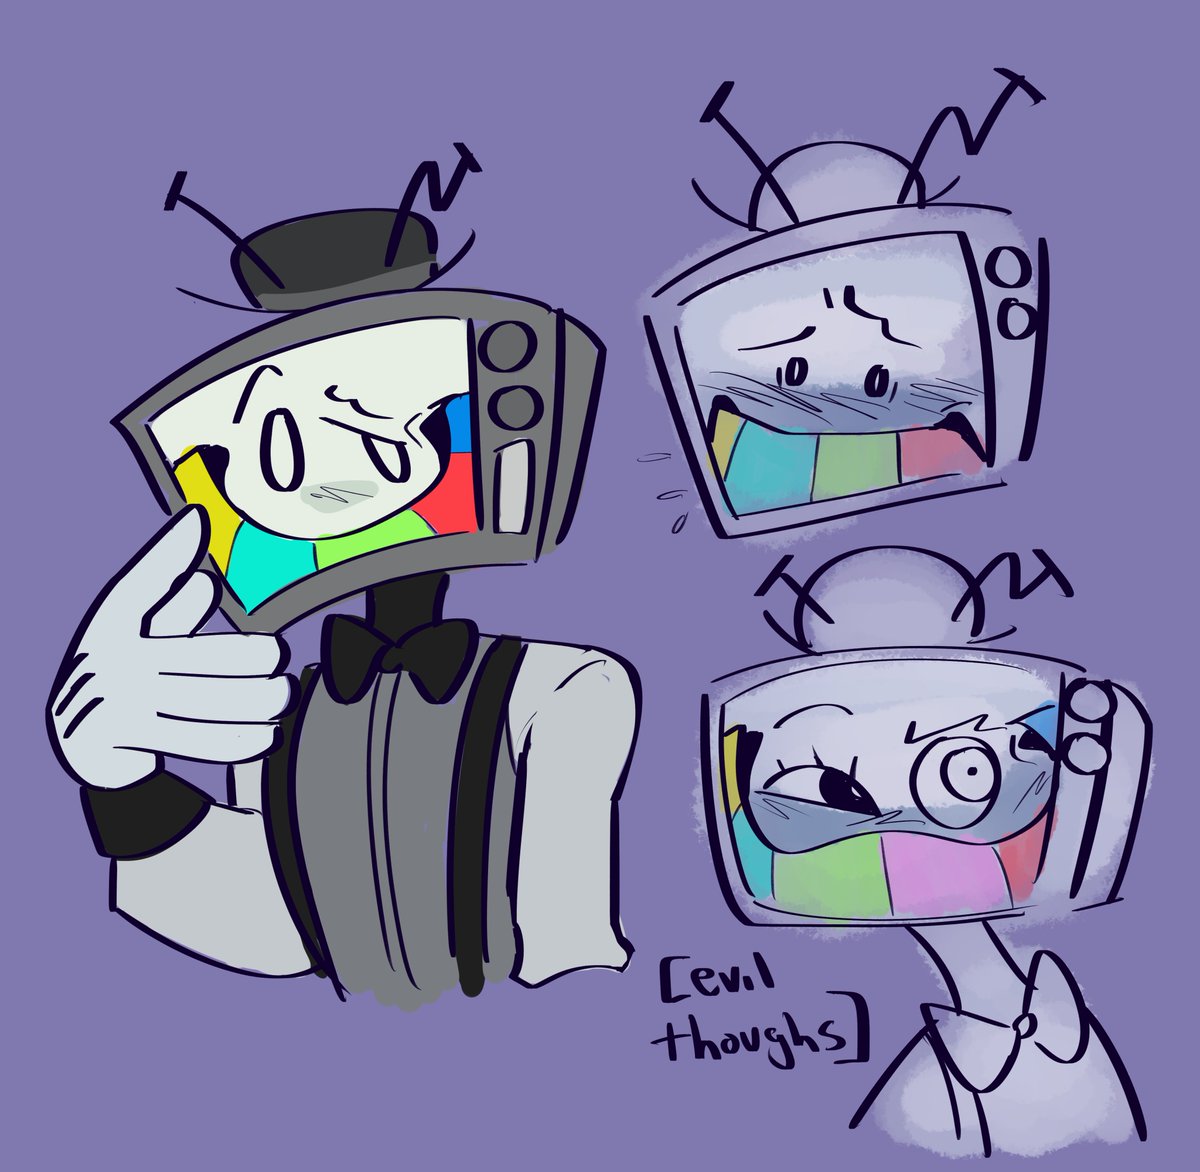 more drawings of Mr Puzzles > 7 < #art #smg4 #Puzzlevision #mrpuzzles